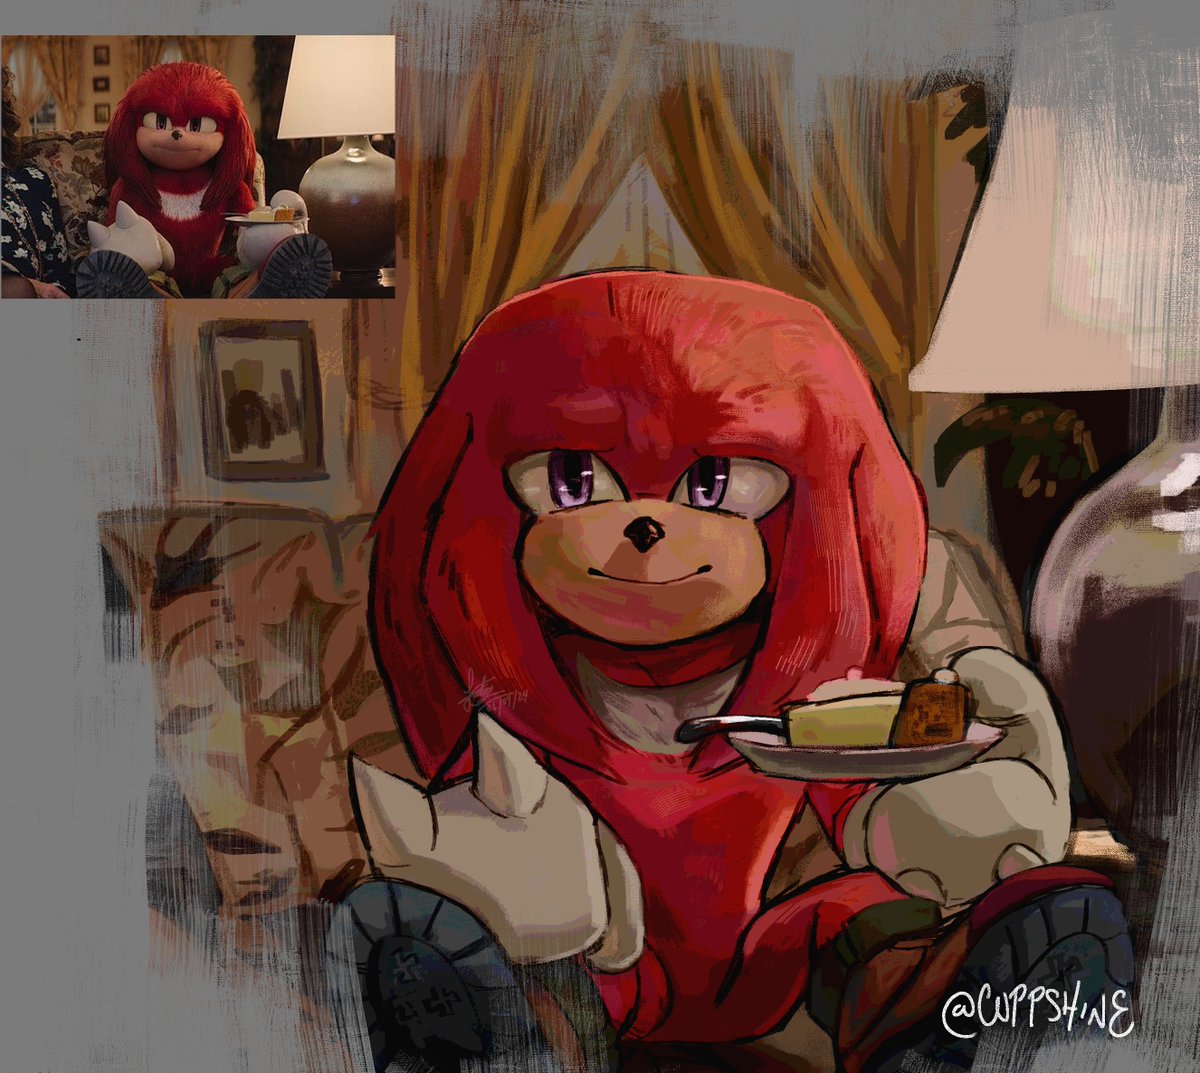 HE'S JUST A SMOL BEAN, SILLY GUY I LOVE HIM AAA #SonicTheHedgehog #Knuckles #redraw